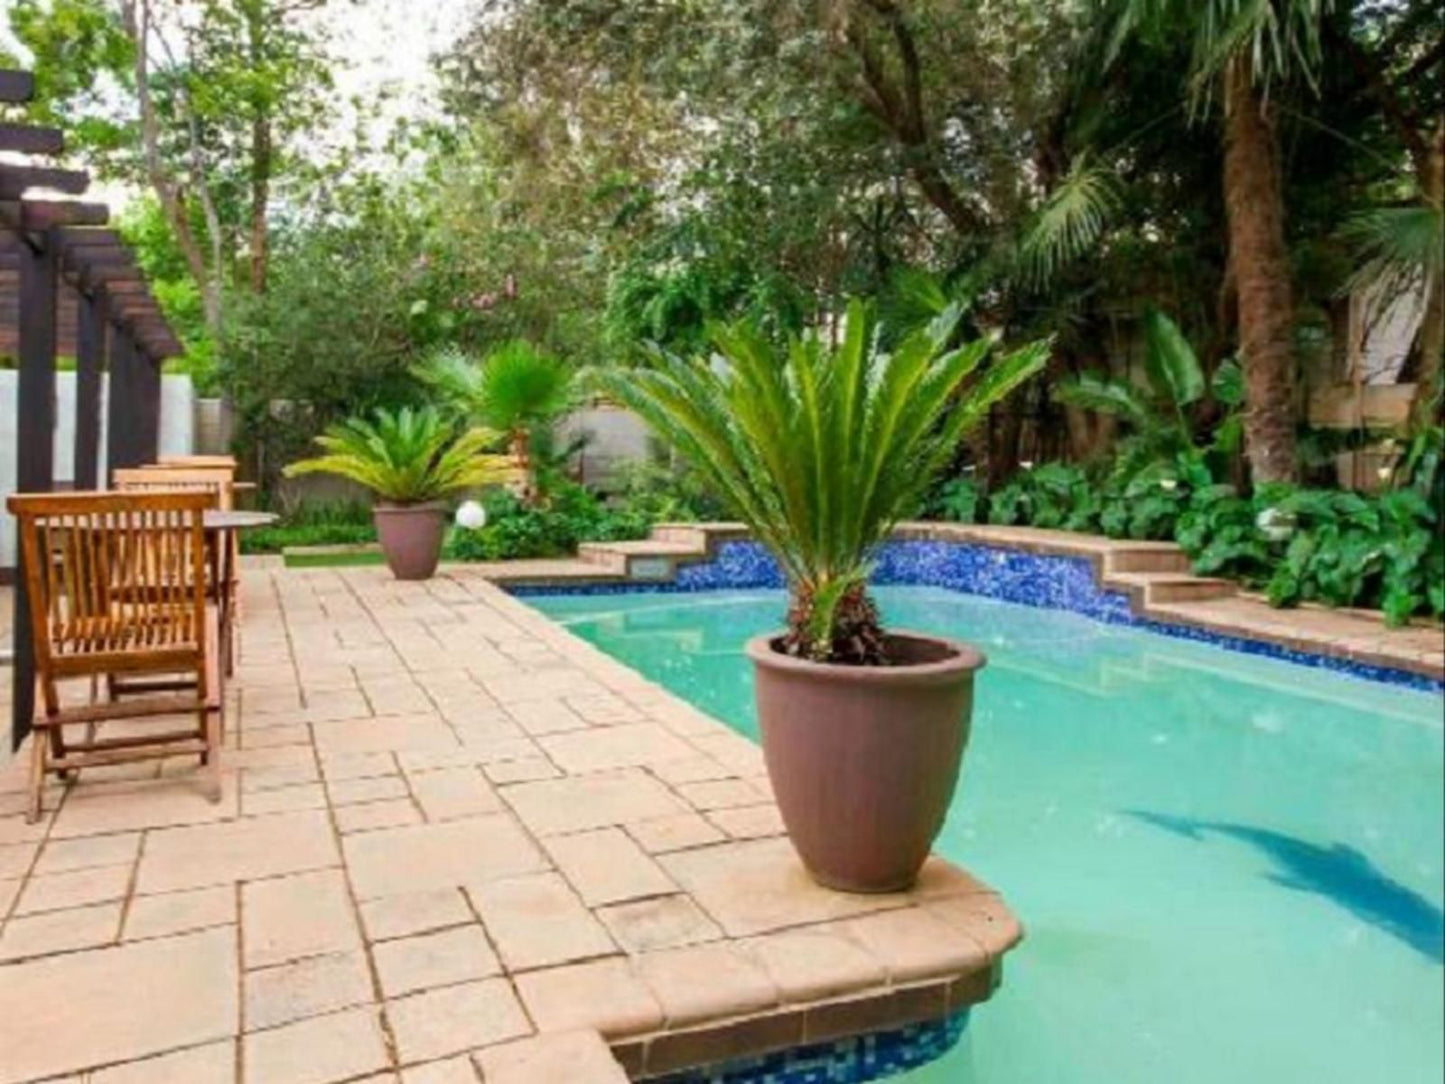 The Villa Guest House Bayswater Bloemfontein Free State South Africa Complementary Colors, Palm Tree, Plant, Nature, Wood, Garden, Swimming Pool